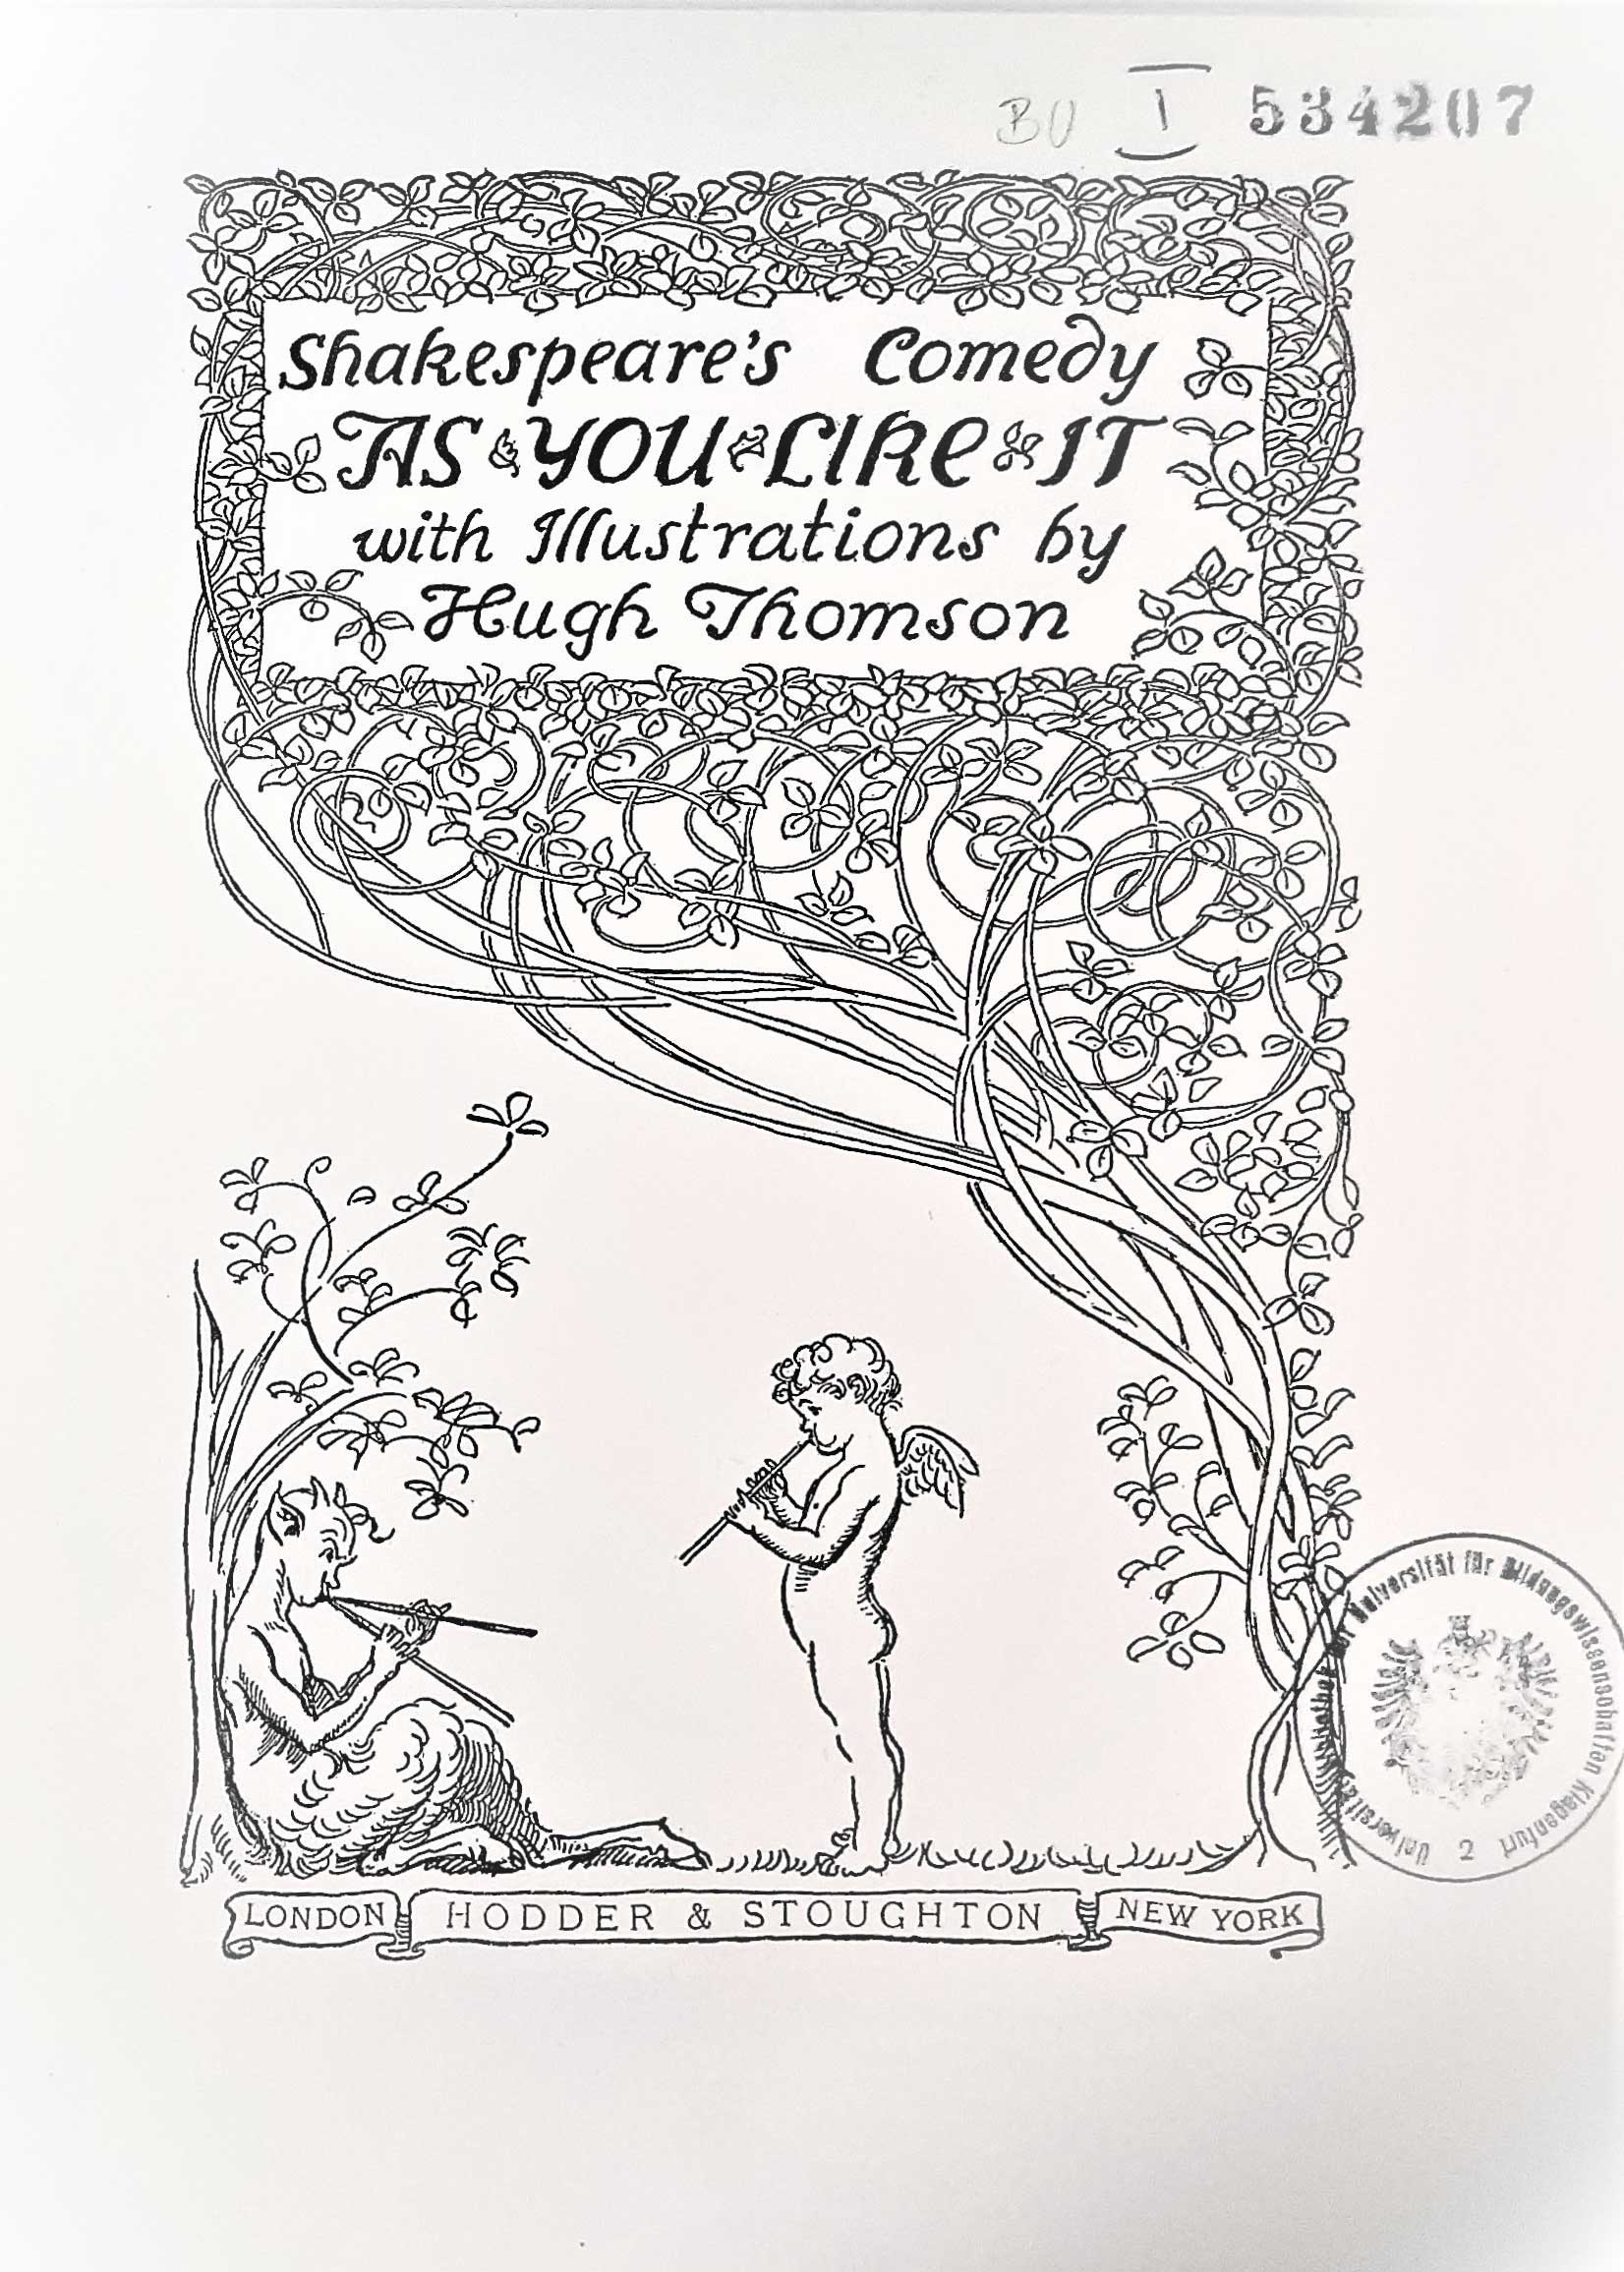 Shakespeare's-Comedy-As-you-like-it-1909